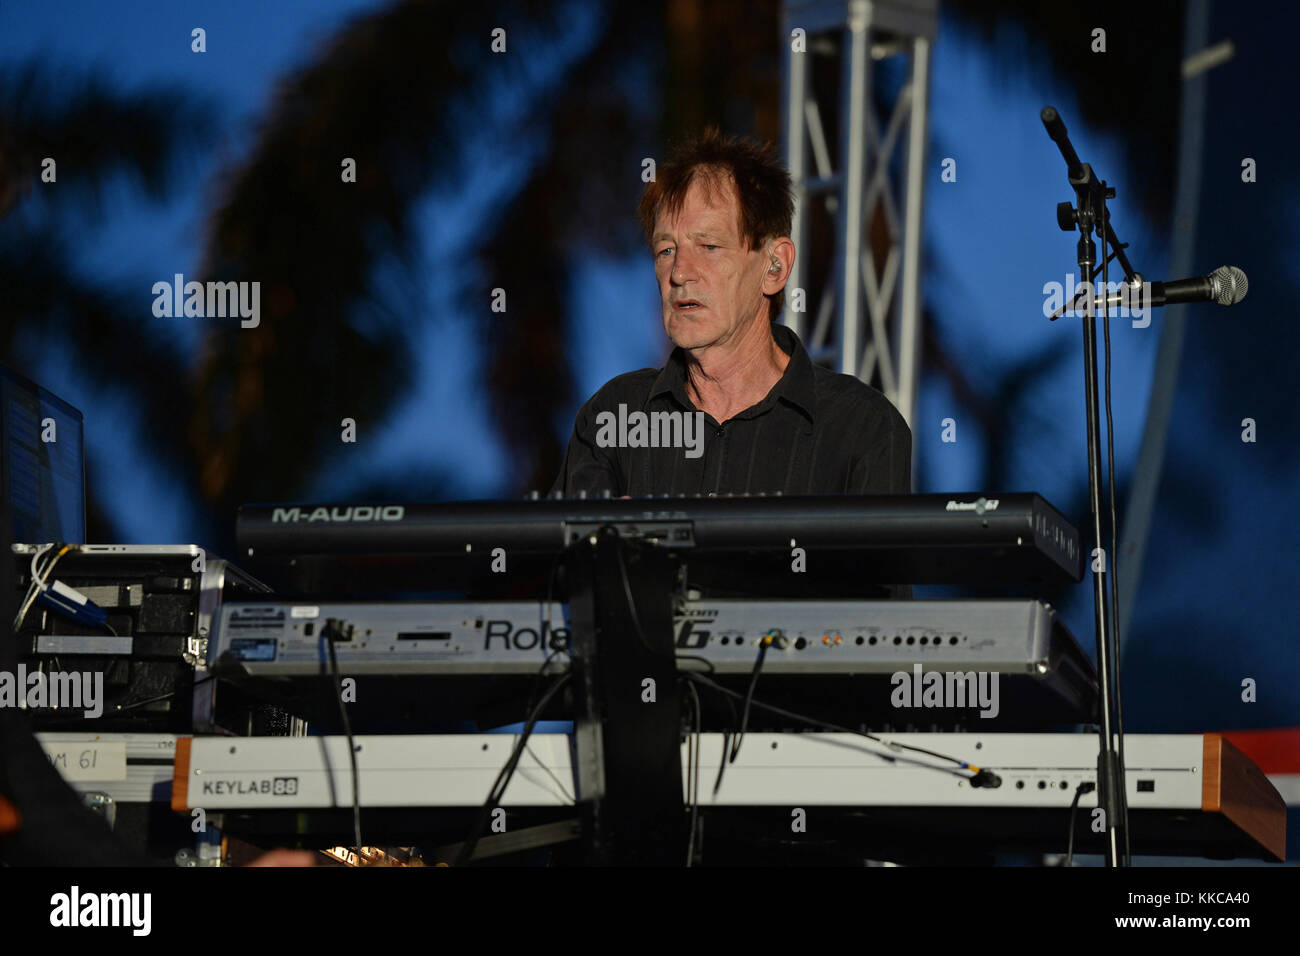 SUNRISE FL - JULY 04: Rupert Greenall of The Fixx performs during the City of Sunrise 4th of July Celebration held at  the BB&T Center on July 4, 2015 in Sunrise, Florida.   People:  Rupert Greenall Stock Photo